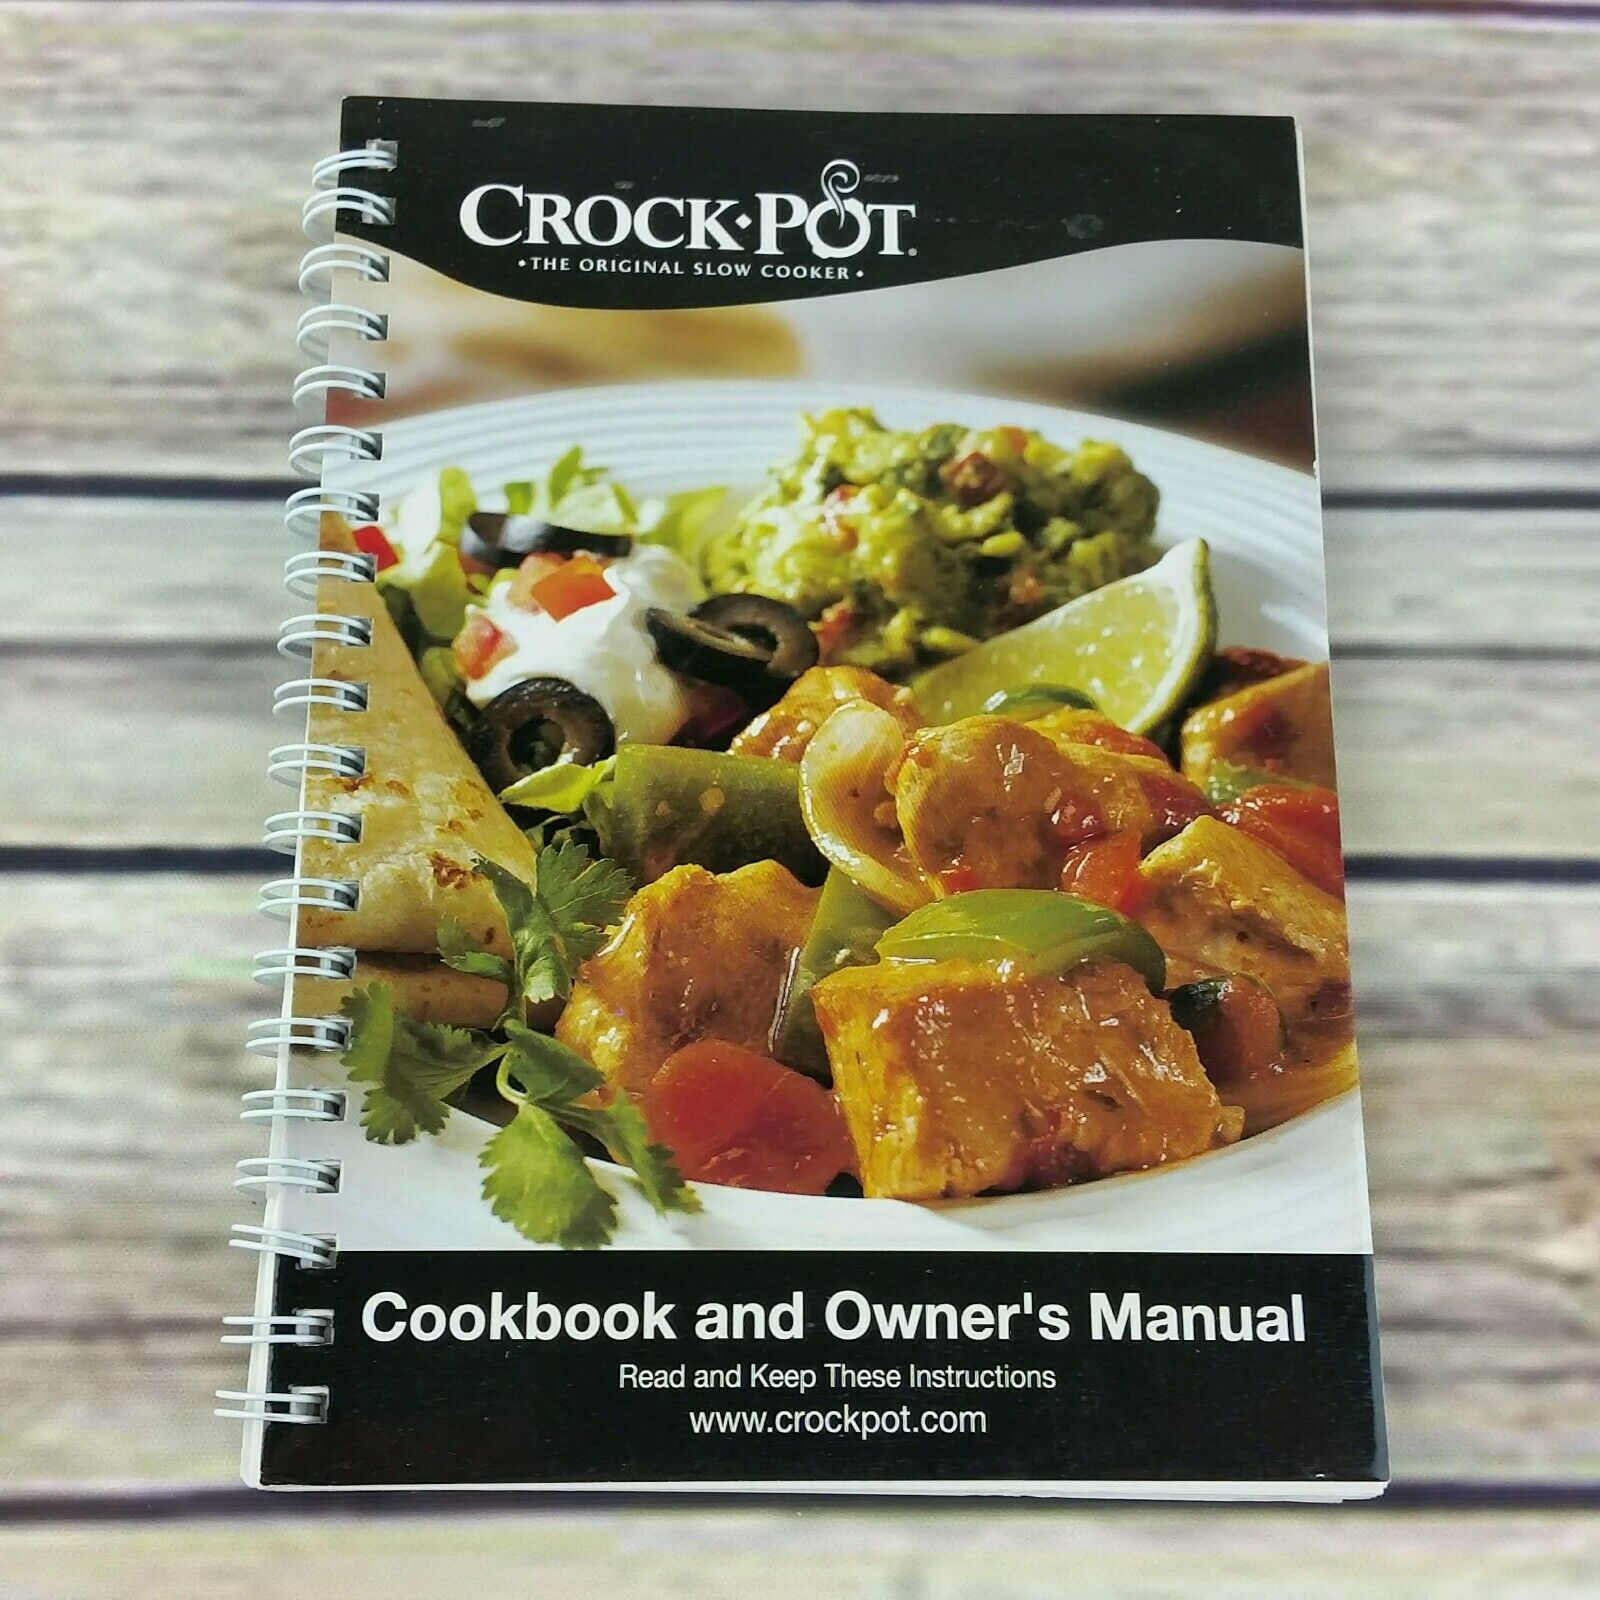 Crock Pot Slow Cooker Cookbook Recipes 2009 Owners Manual Appetizers Desserts - At Grandma's Table